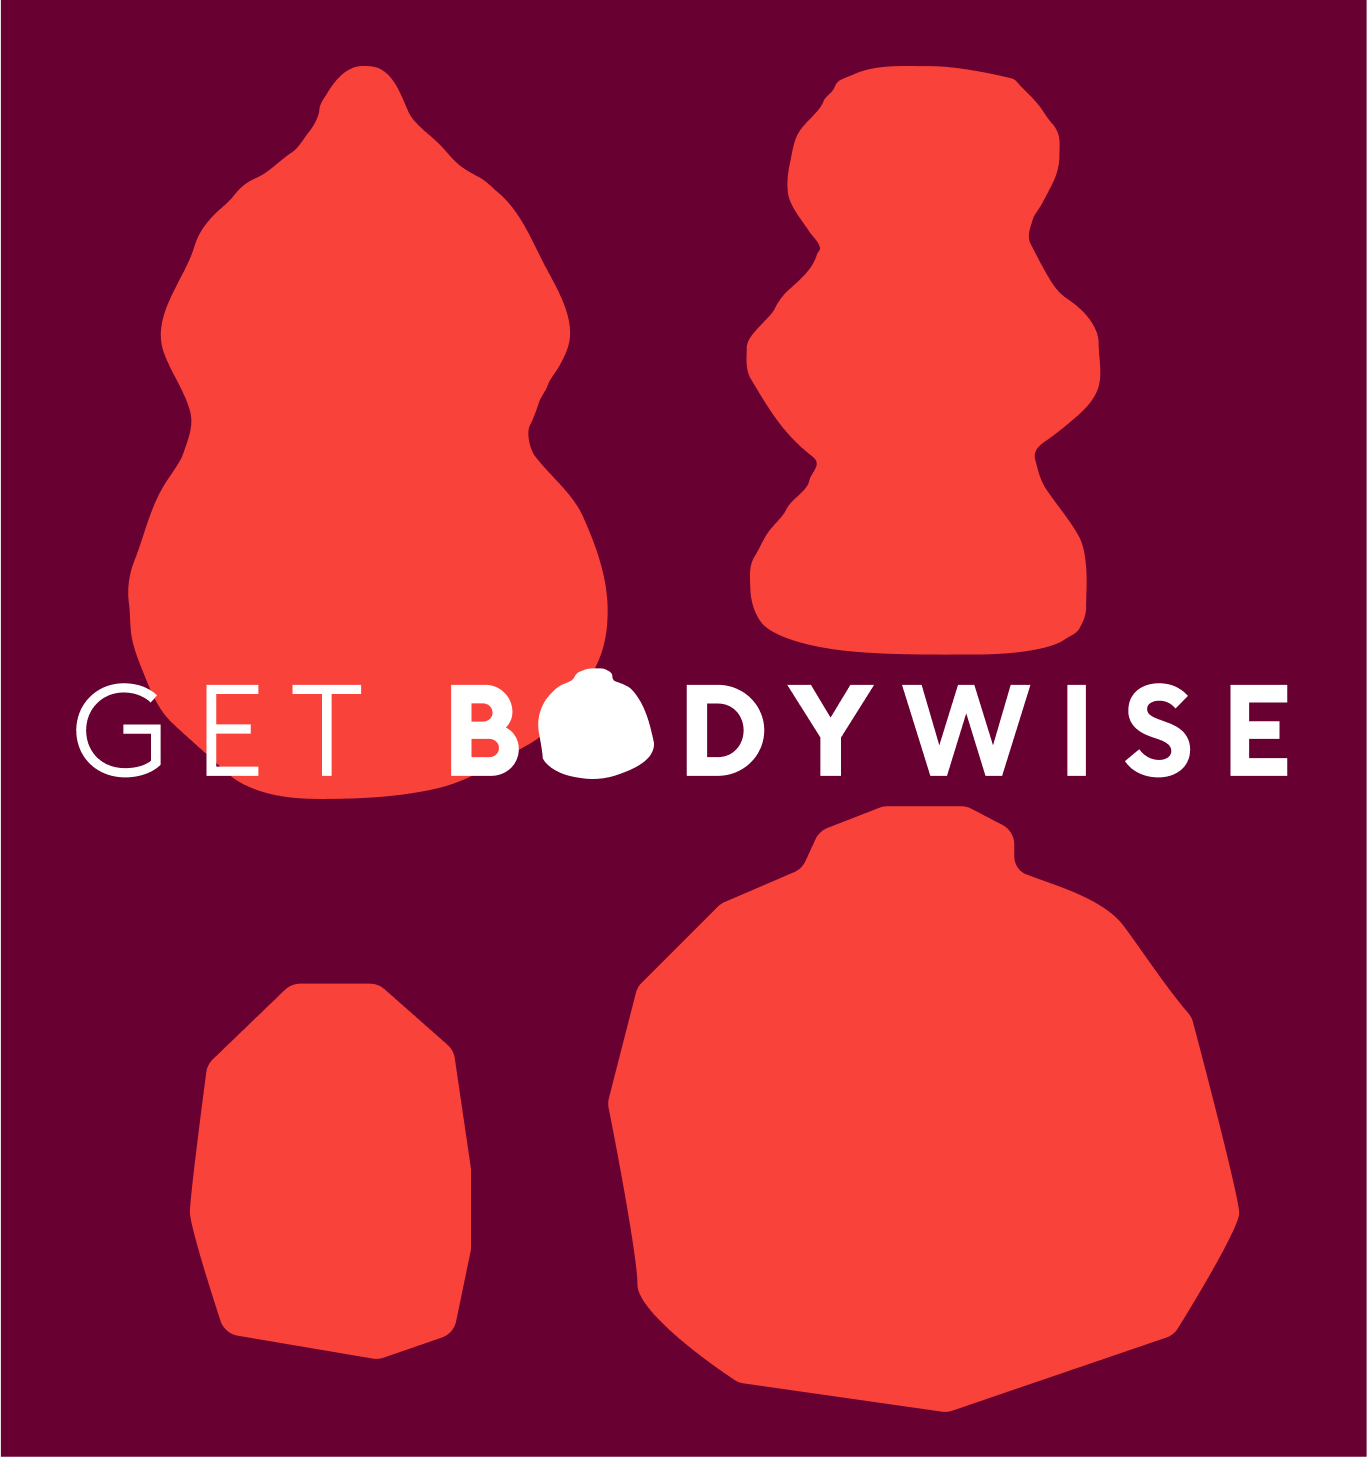 Get Body Wise Image